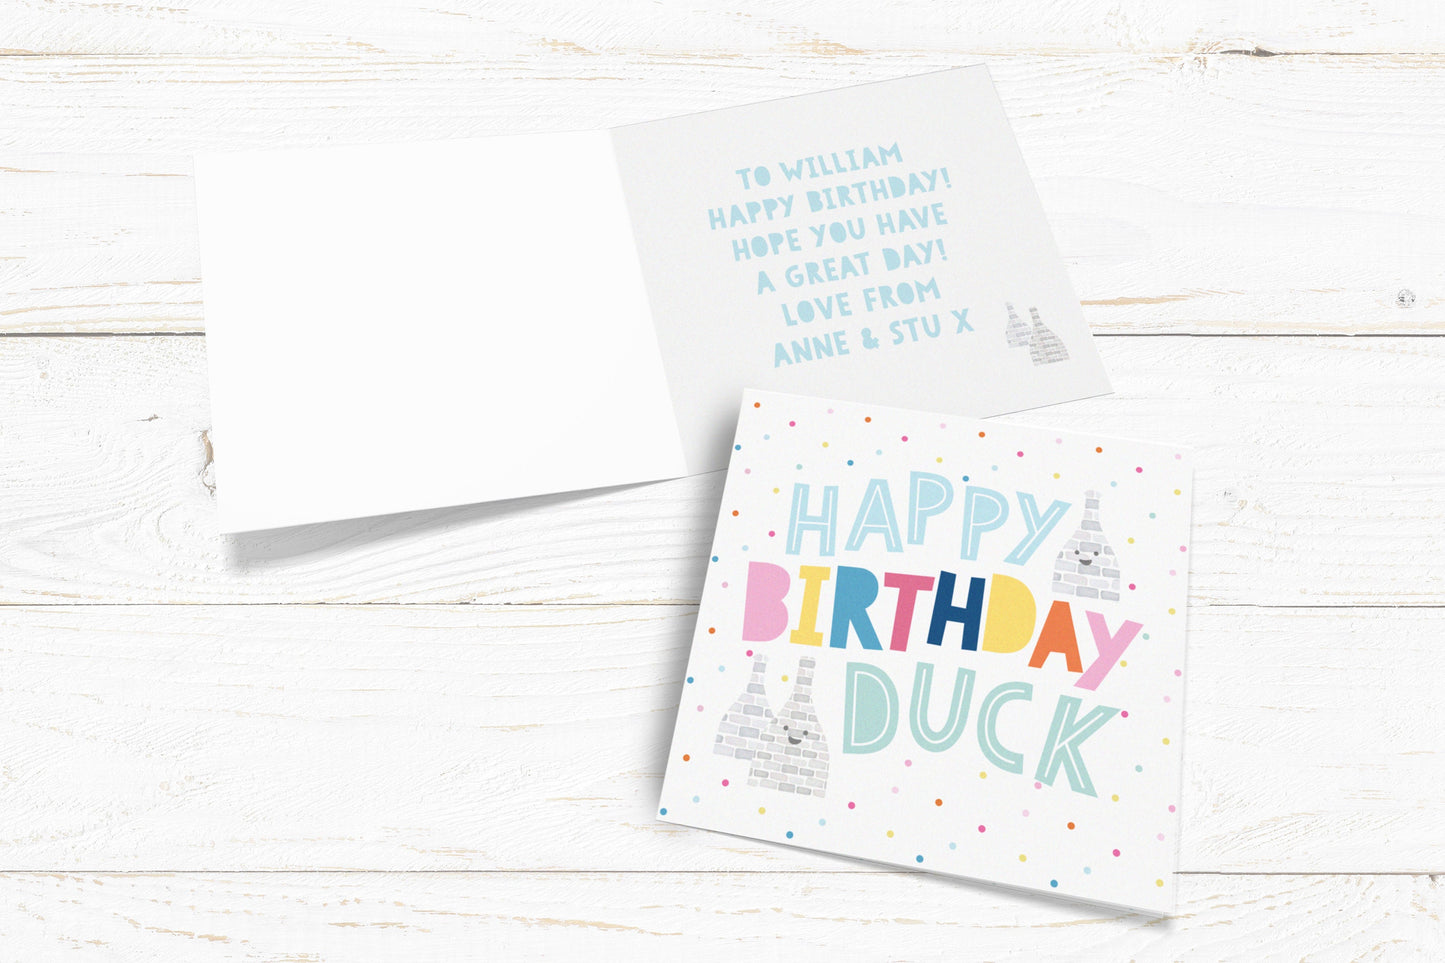 Happy Birthday Duck Card. Personalised Birthday Card. Stokie Card. Stoke on Trent Card. Send Direct Option.